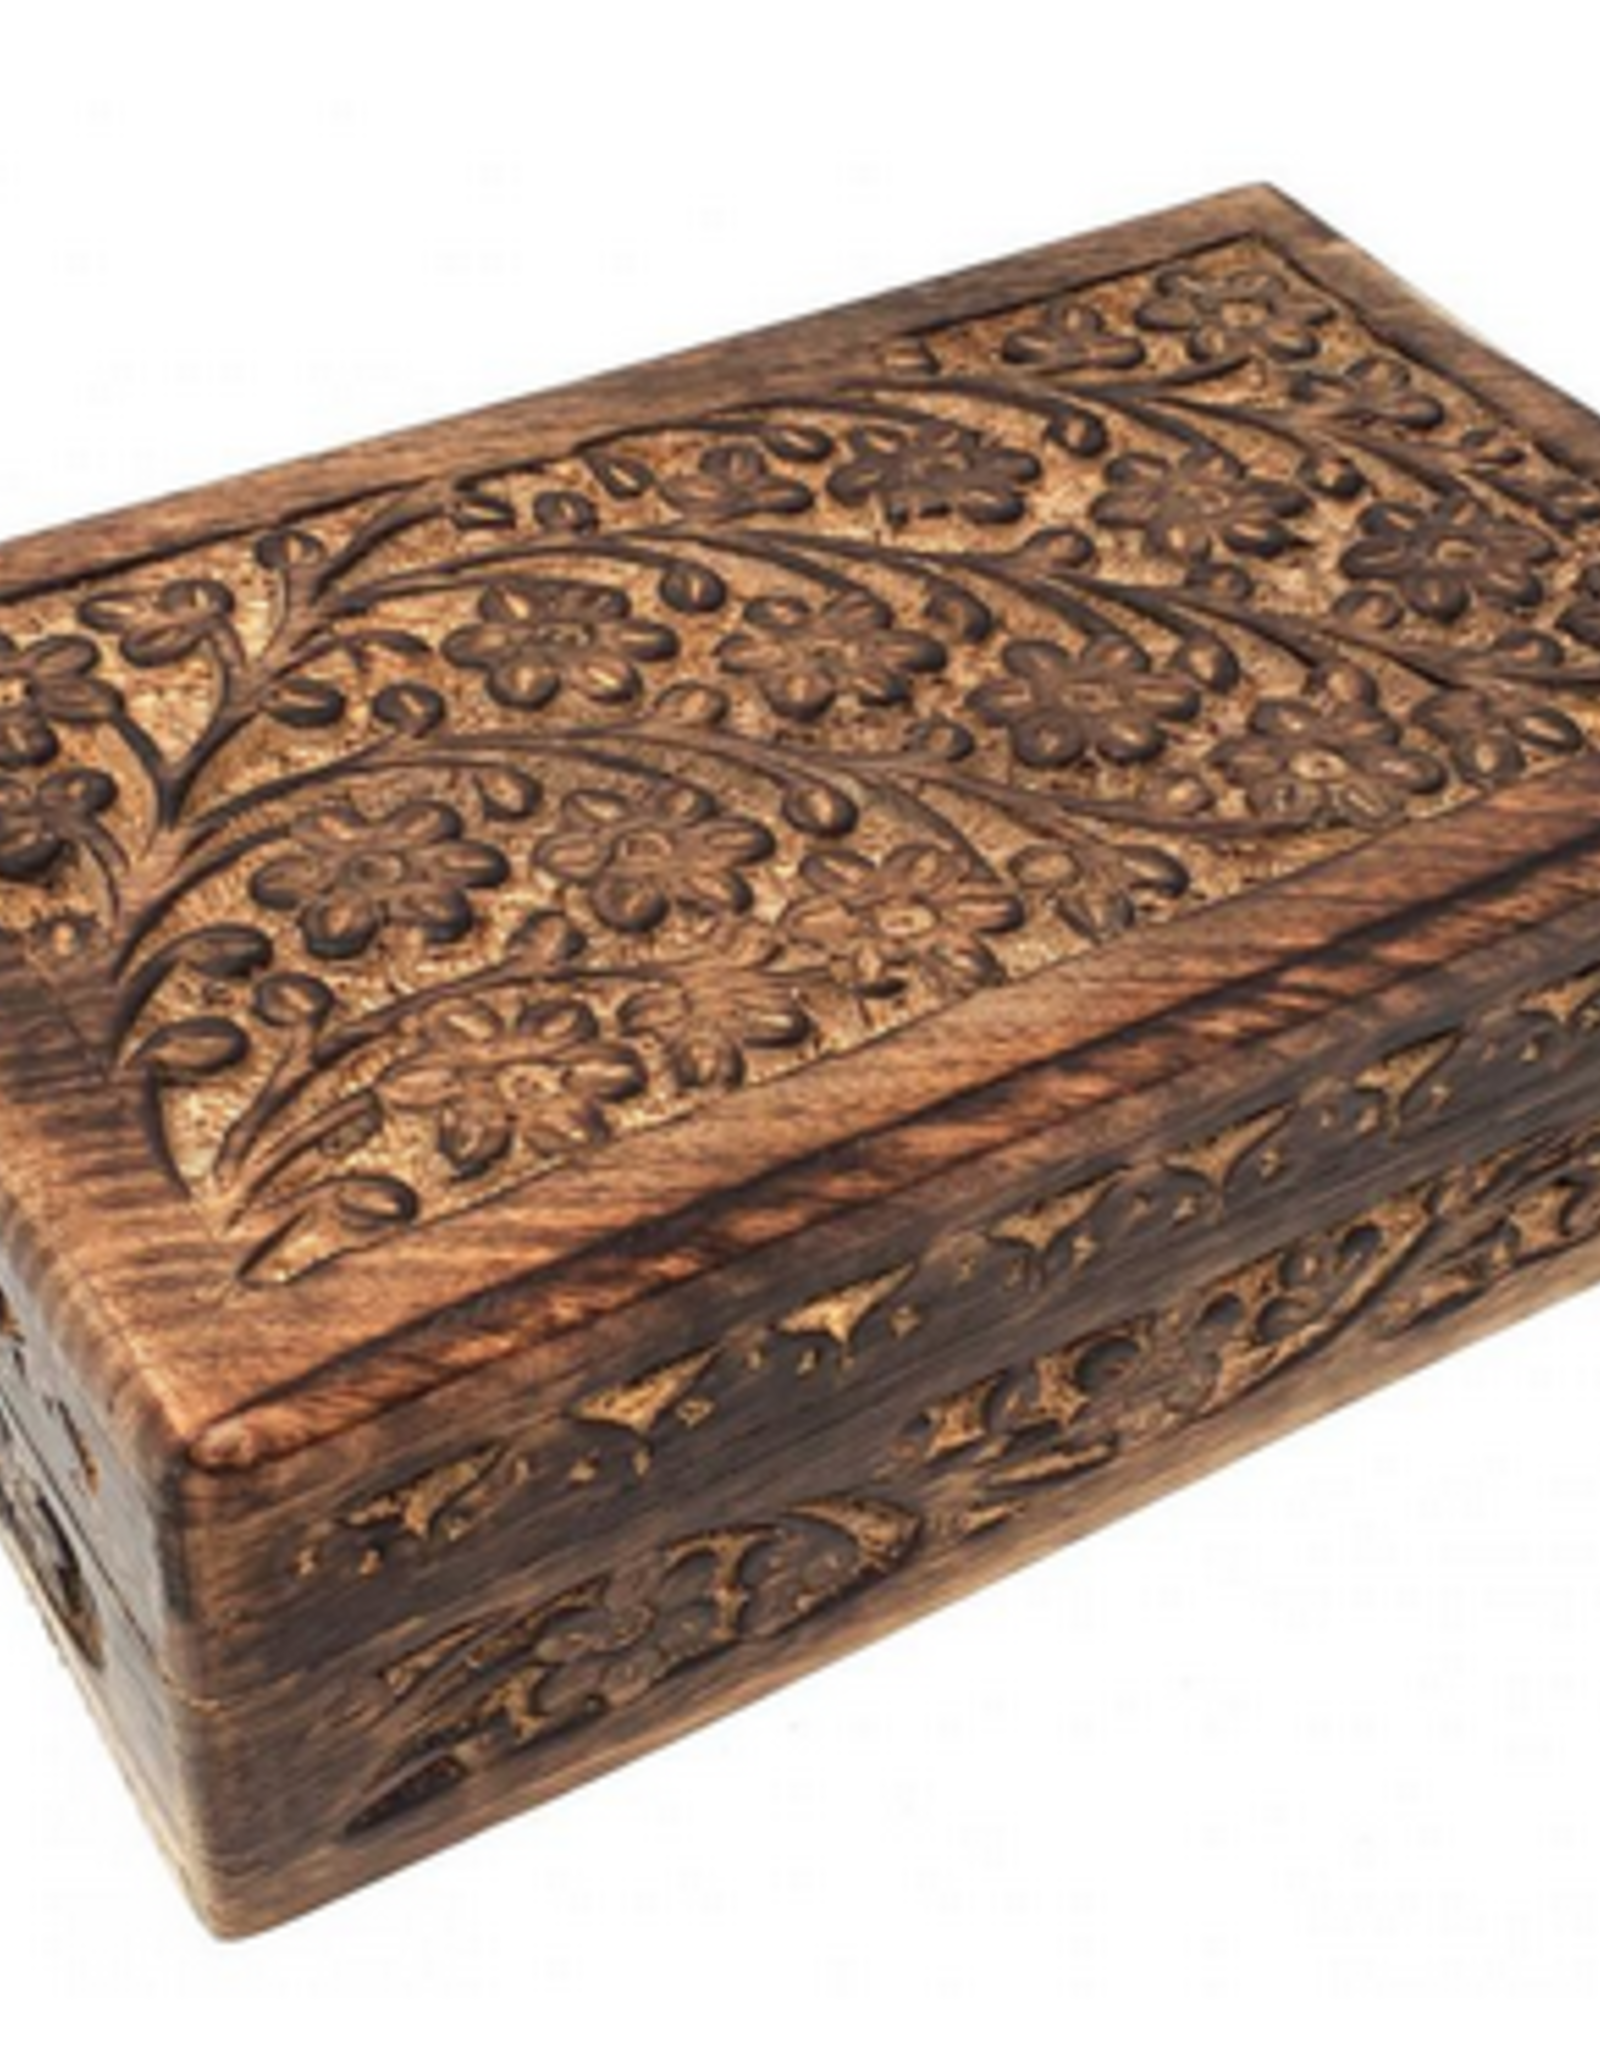 New Age Imports, Inc. Floral Carved Wooden Box 6x10"